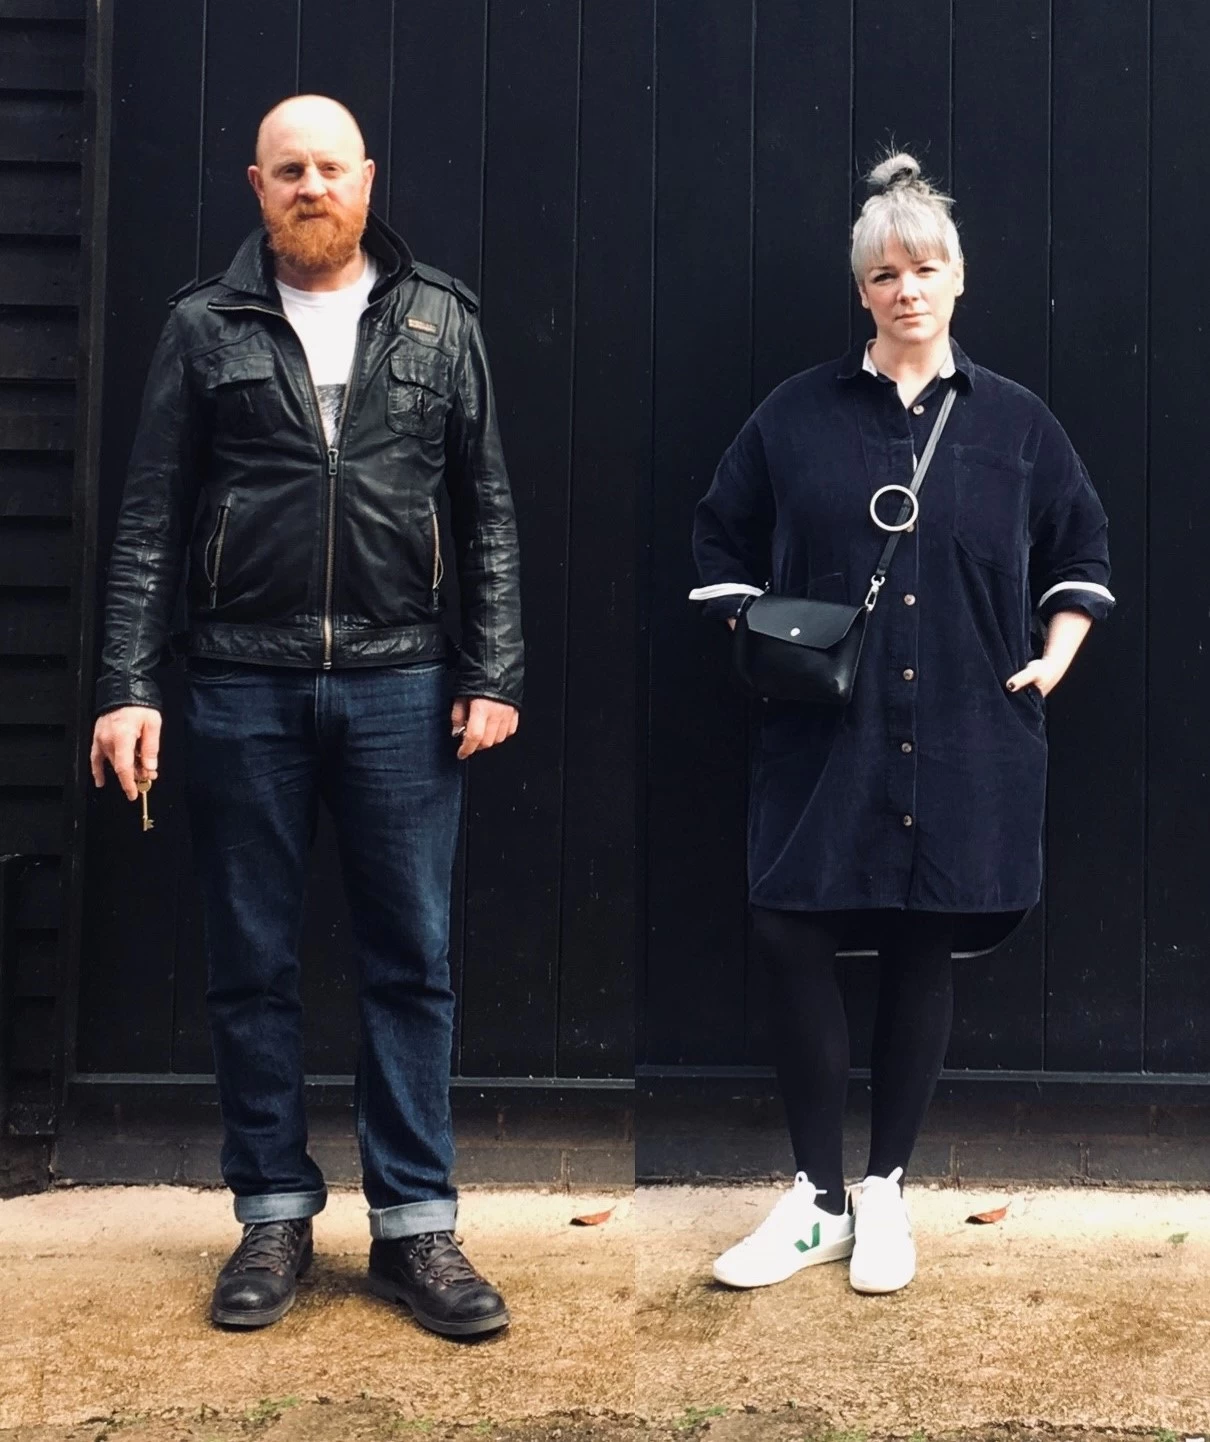 This is us. The Snow Sheppard duo outside a black barn, Stephen Sheppard  and Elizabeth Snow.